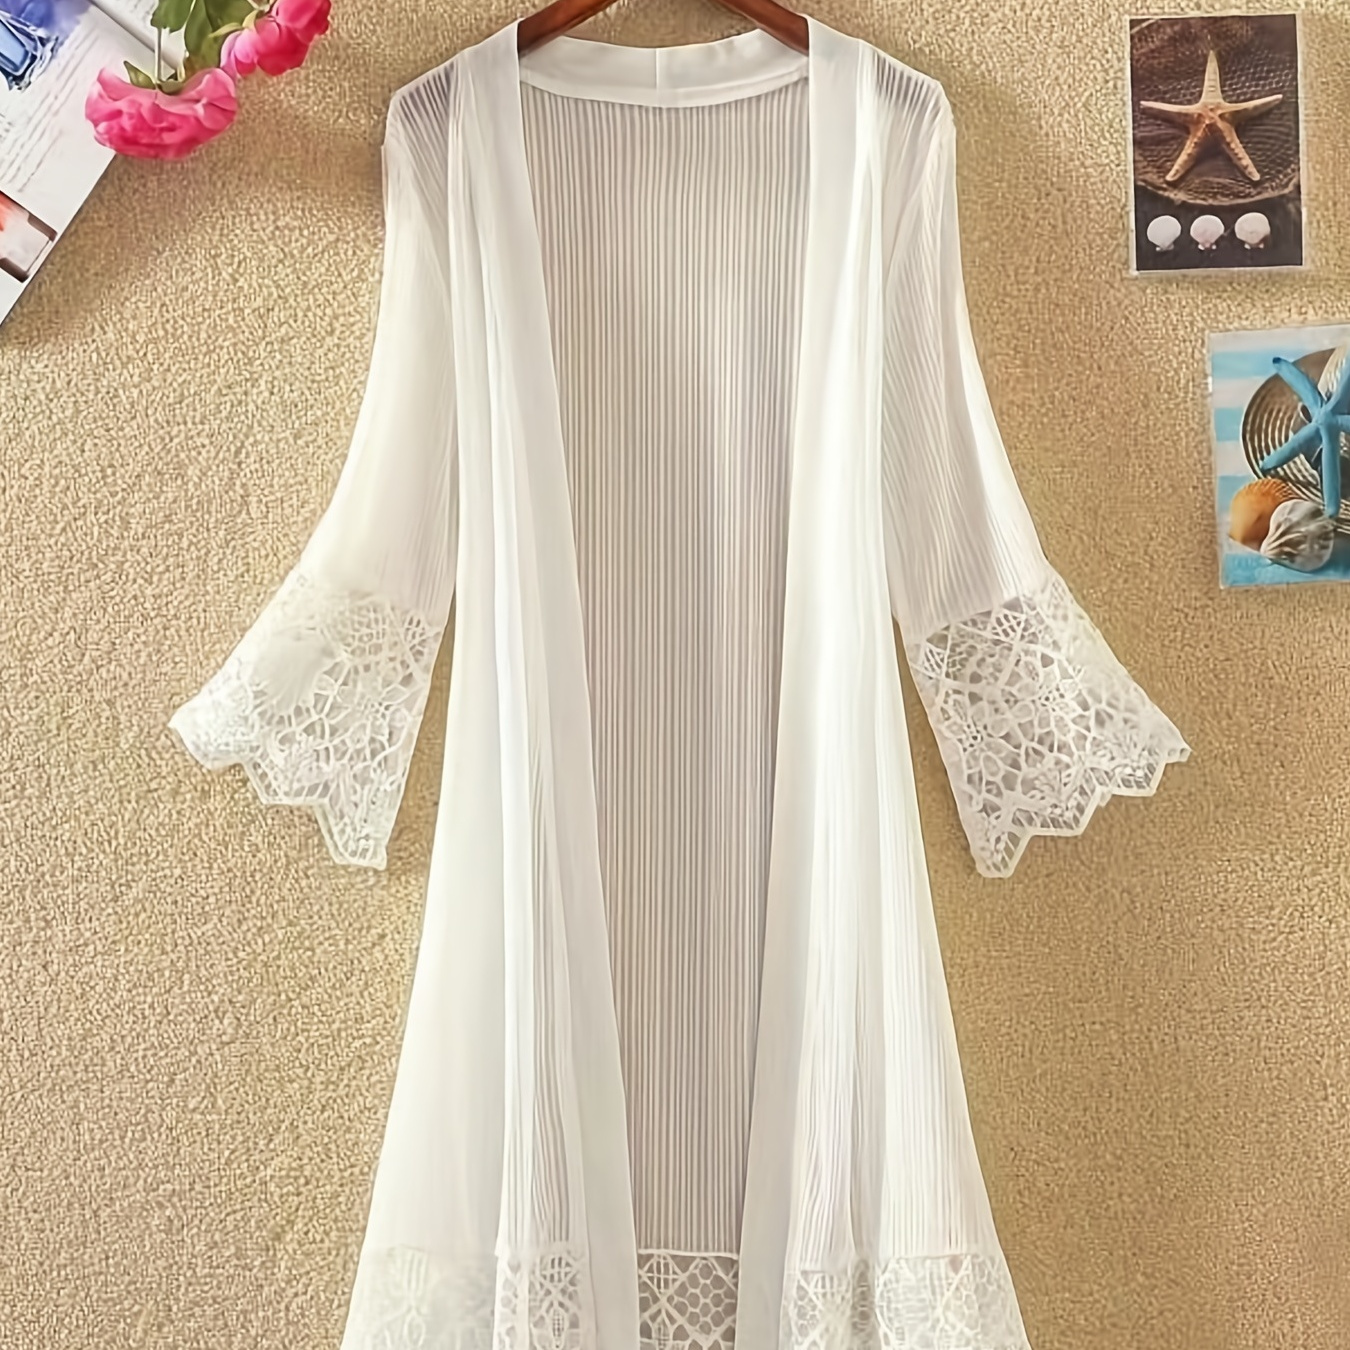 

Lace Eyelet Embroidery White Cover Up, Open Front 3/4 Sleeves Sun Protective Cardigan, Elegant & Stylish, Women's Swimwear & Clothing For Holiday